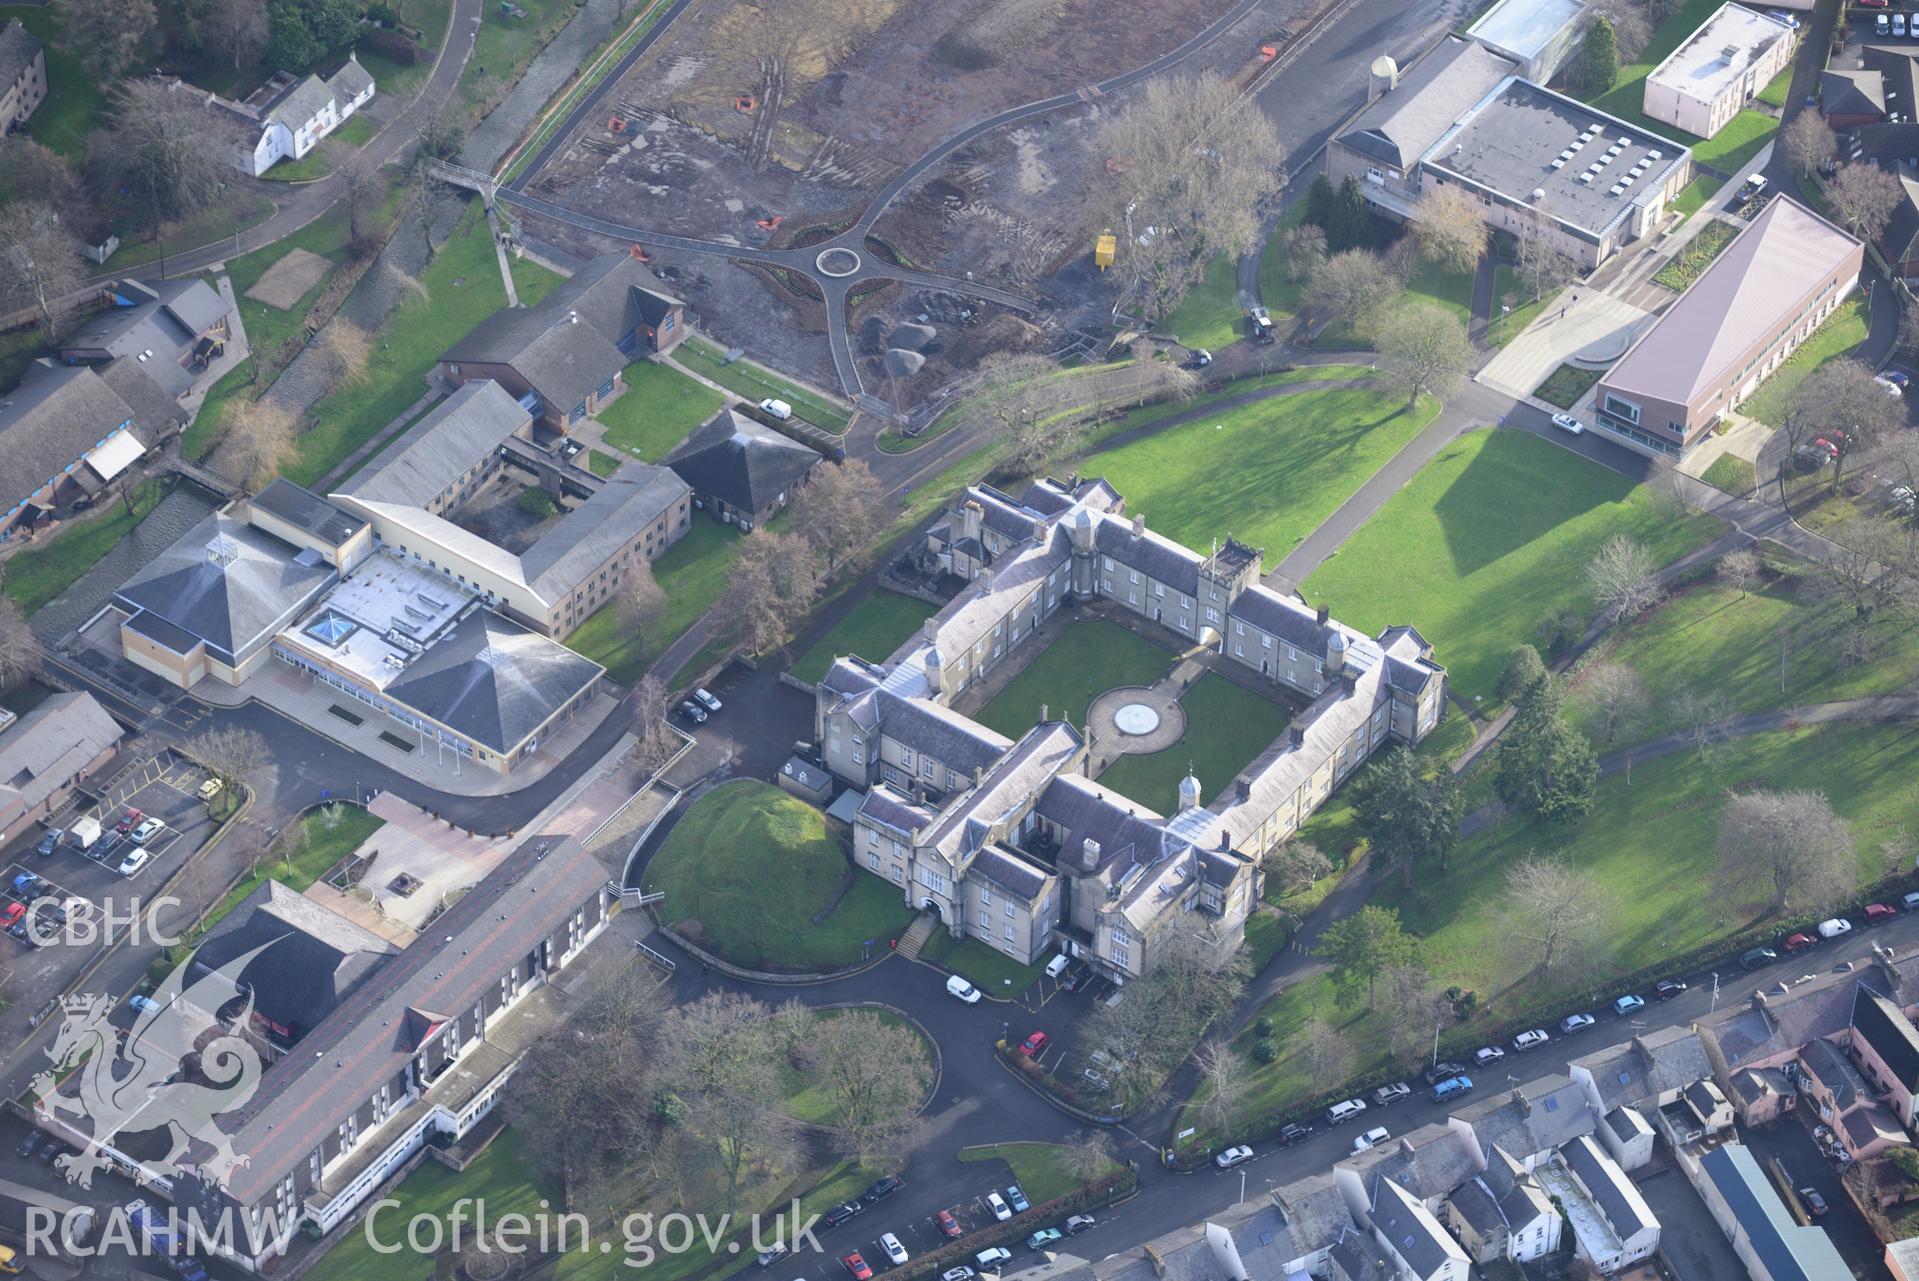 St David's College garden, the Roderic Bowen Library and Archives and Stephen's Castle, Lampeter. Oblique aerial photograph taken during the Royal Commission's programme of archaeological aerial reconnaissance by Toby Driver on 6th January 2015.